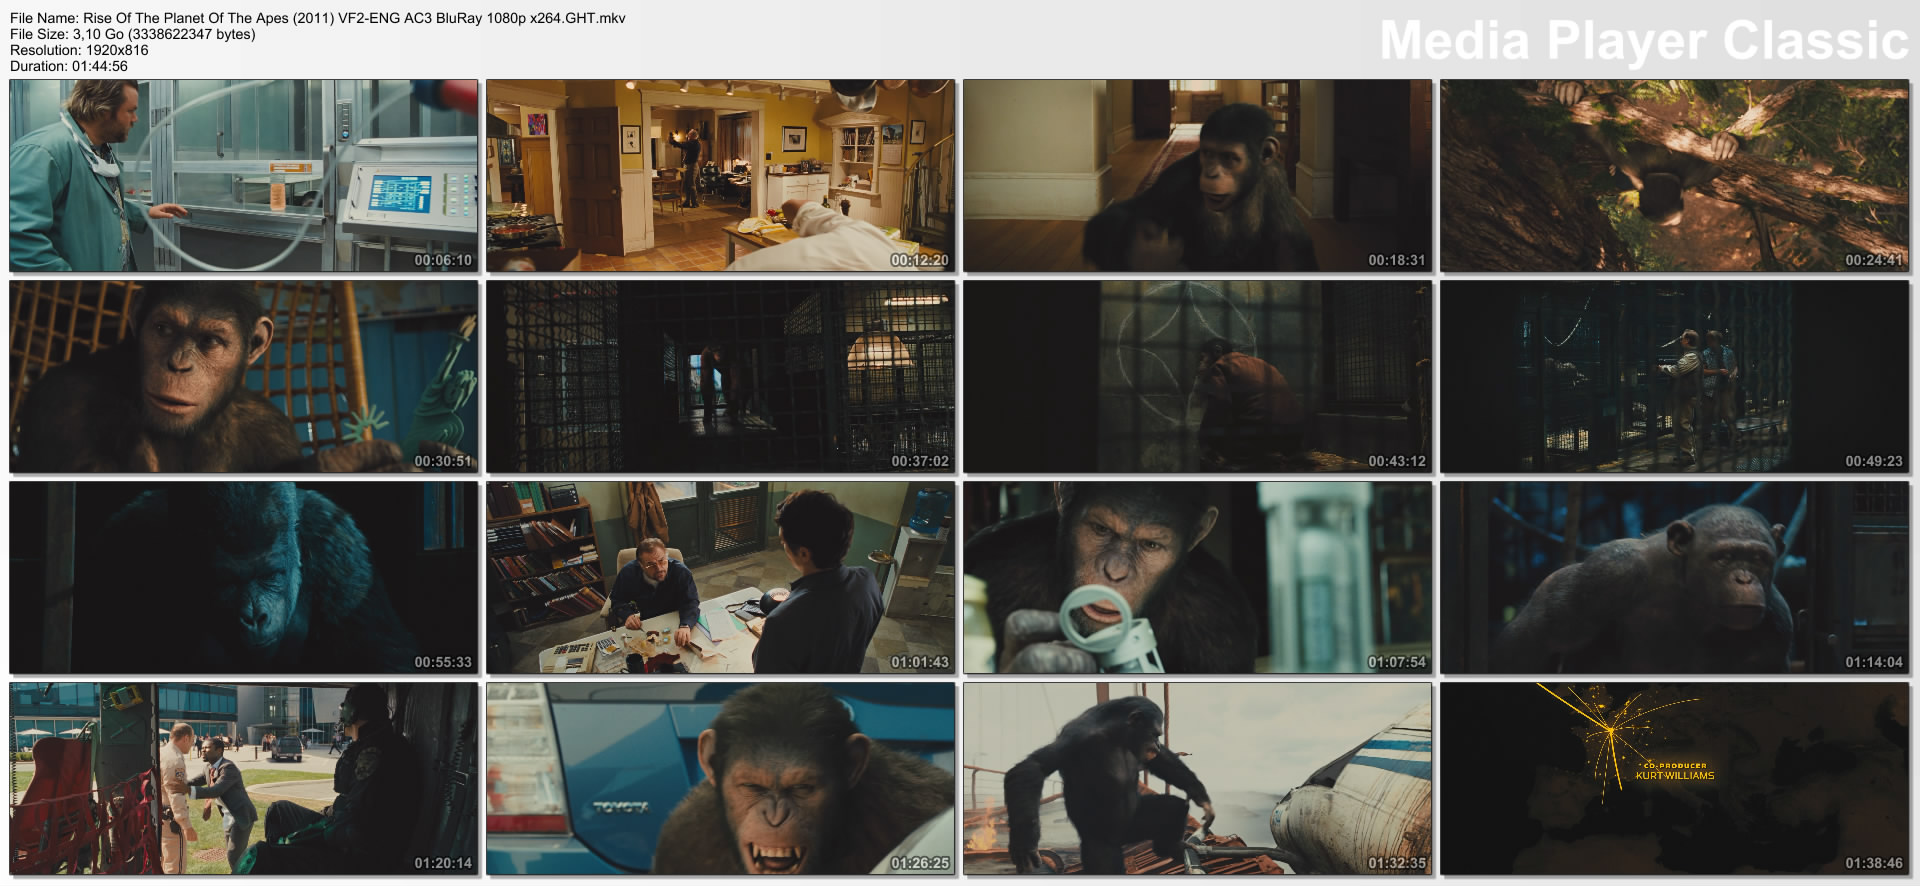 Rise Of The Planet Of The Apes (2011) VF2-ENG AC3 BluRay 1080p x264.GHT